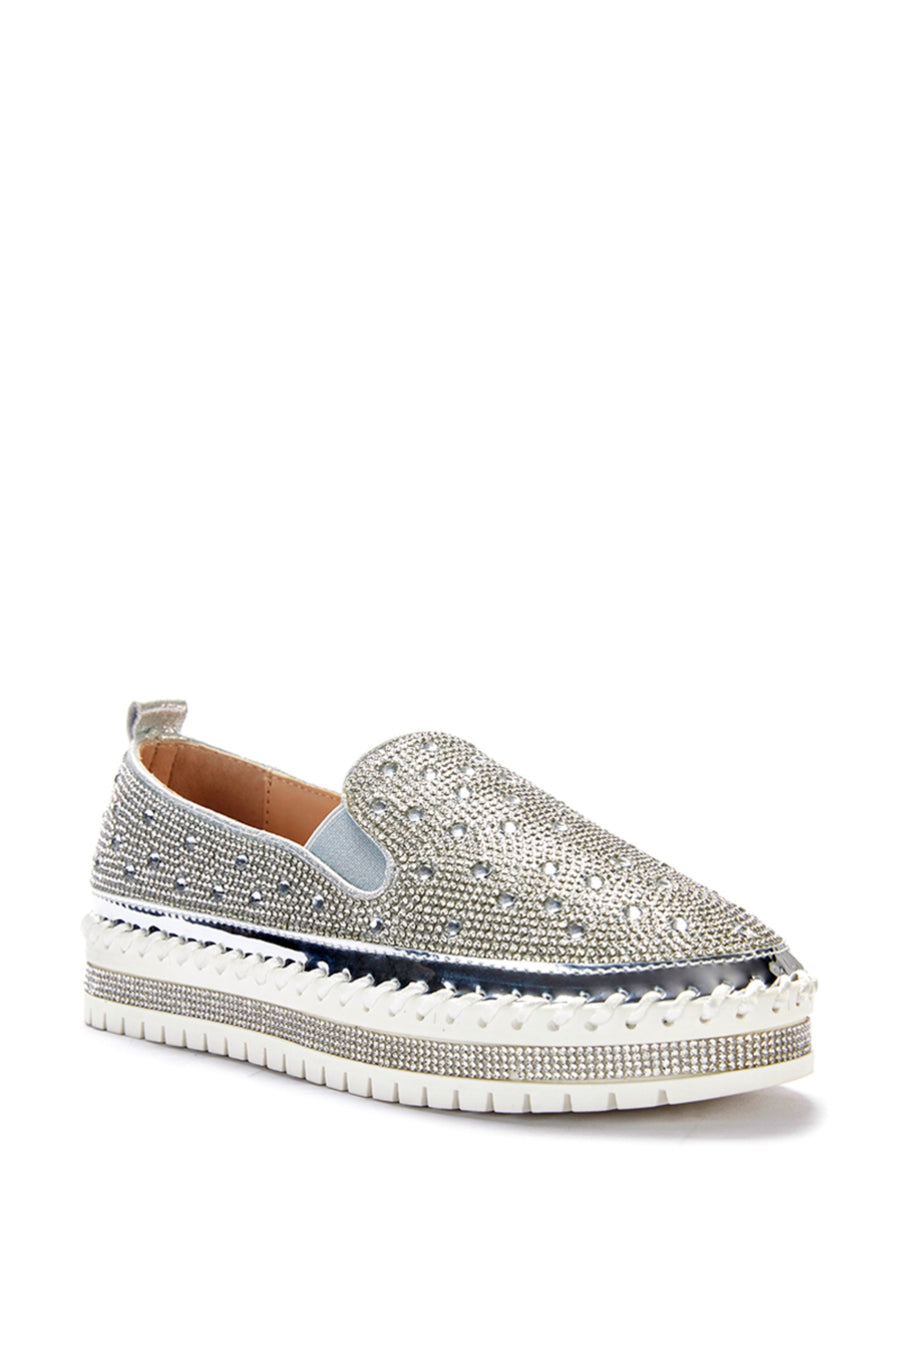 angled view of slip on metallic silver flat sneakers with crystal rhinestone embellishments and a white braided platform sole